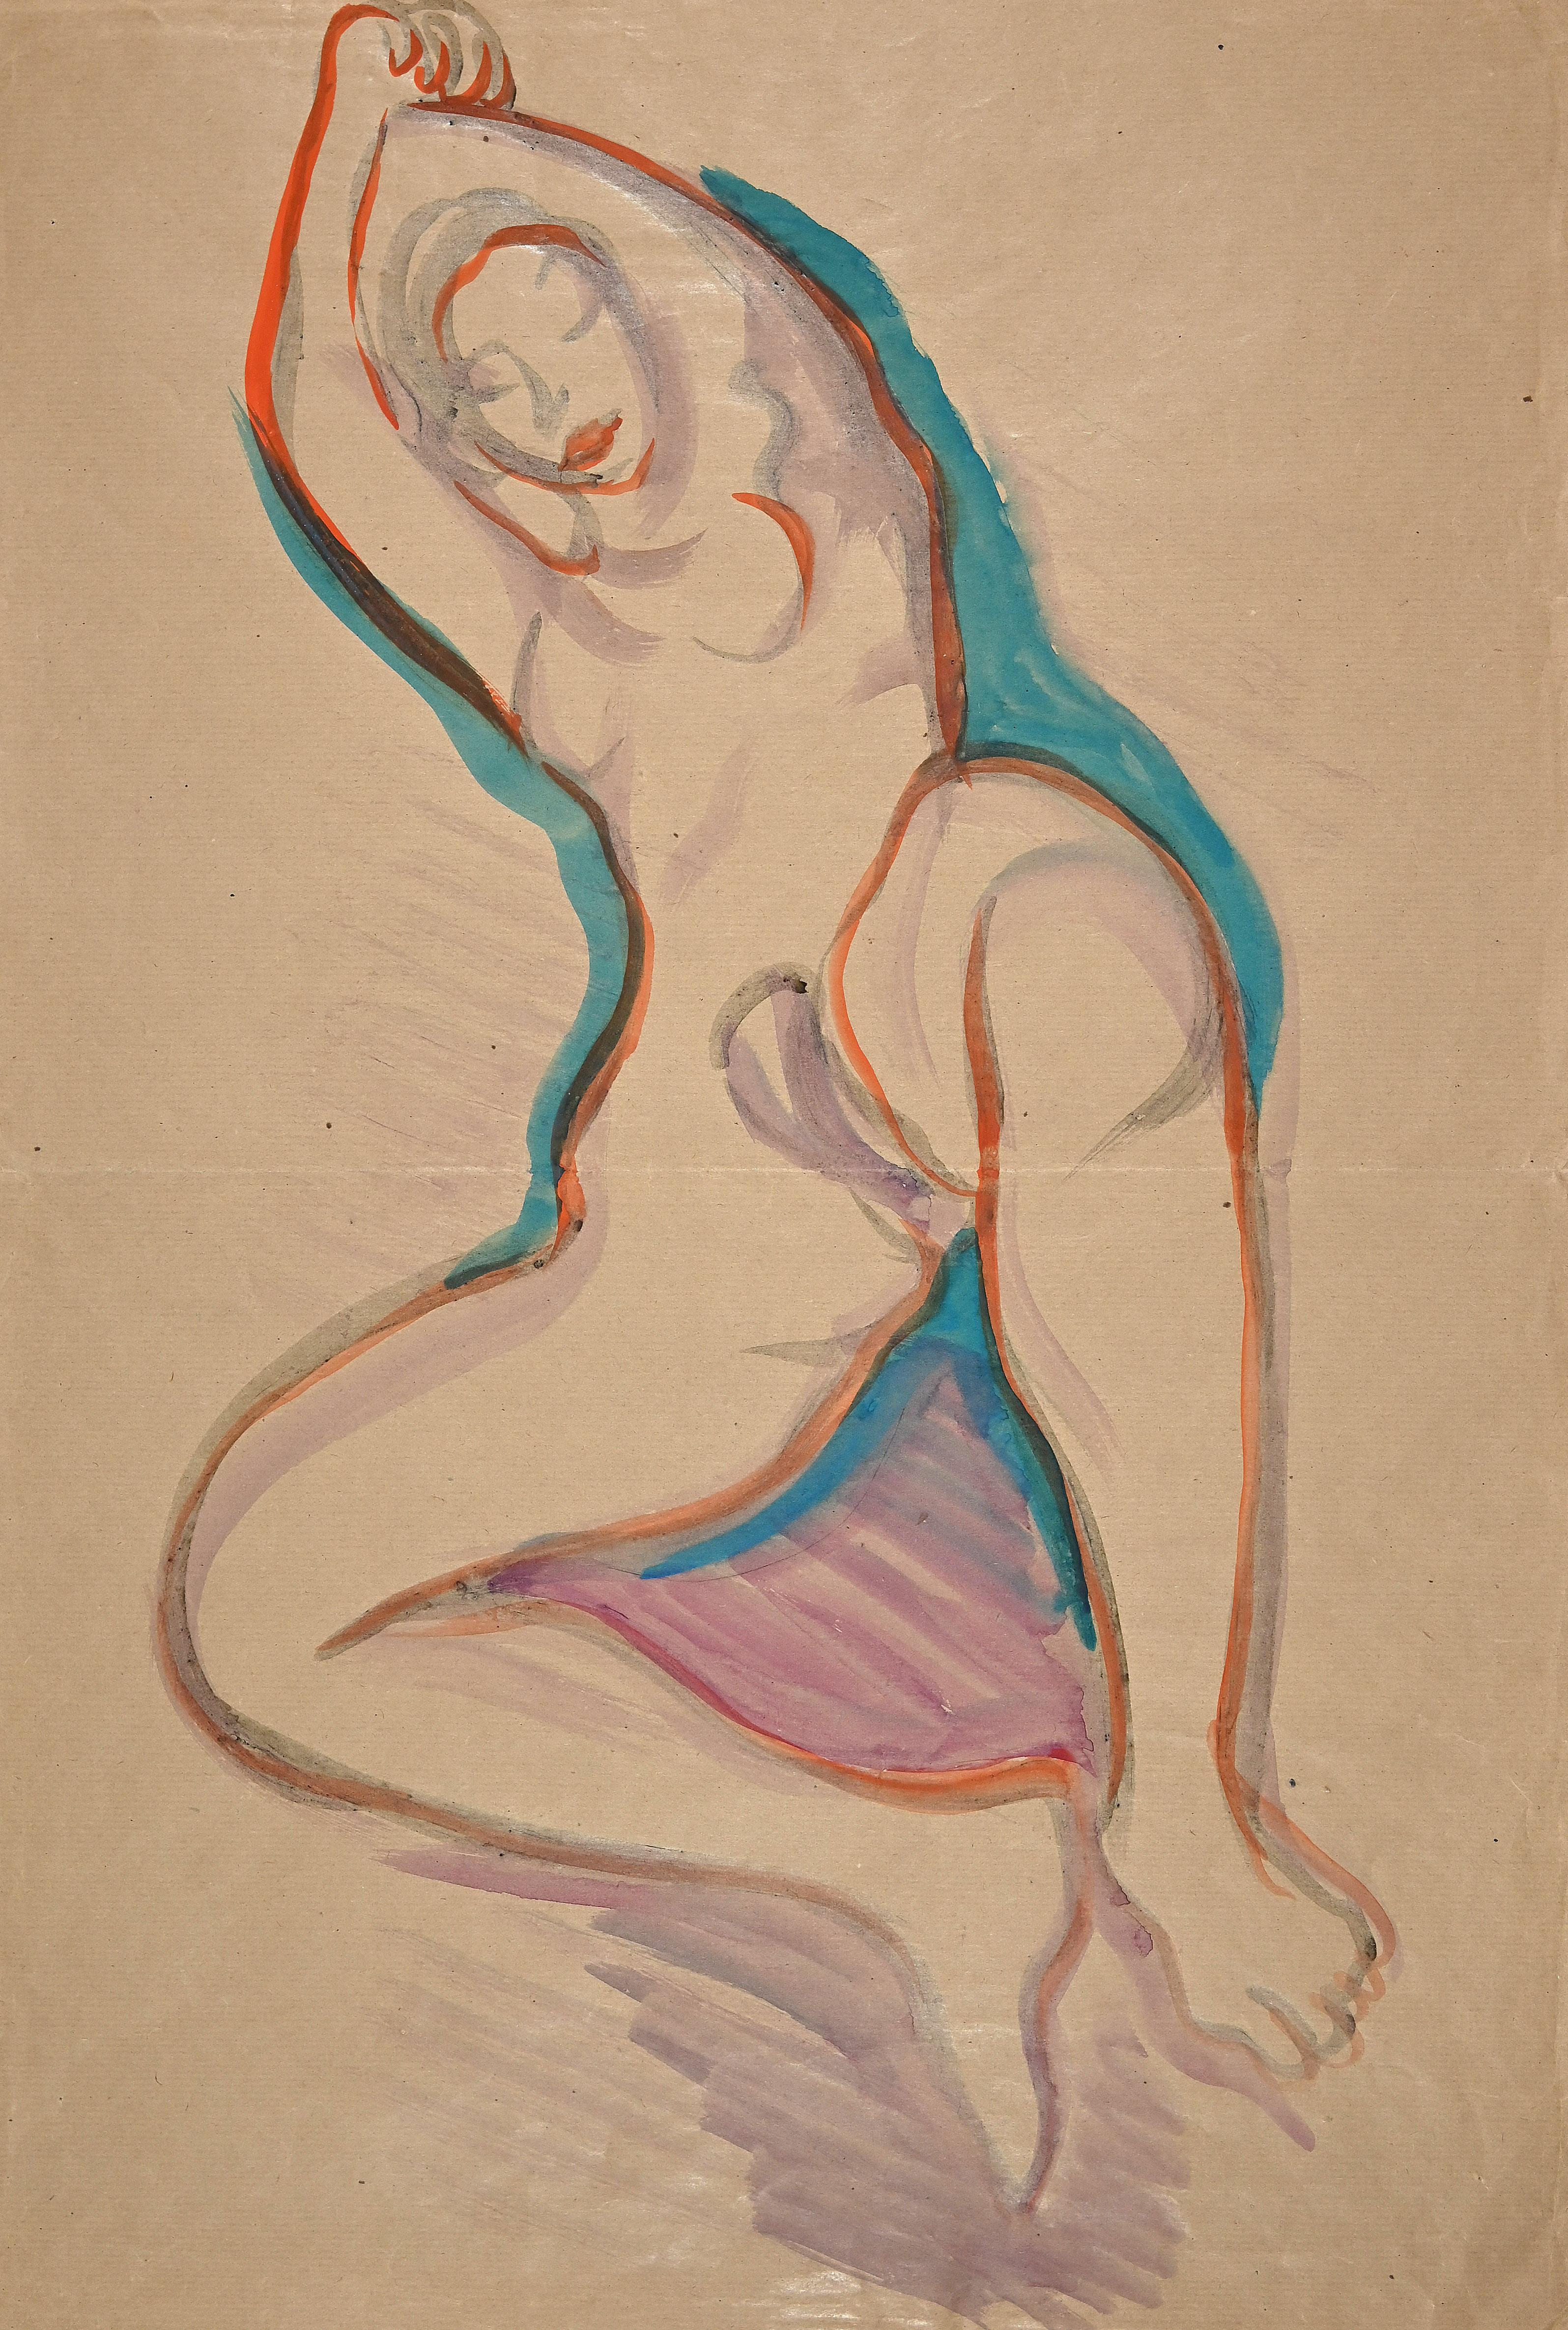 Nude is an original drawing in watercolor, realized in the Mid-20th Century by Jean Delpech (1916-1988). 

Good conditions.

Jean-Raymond Delpech (1988-1916) is a French painter, engraver and illustrator, who is most influenced by the country of his